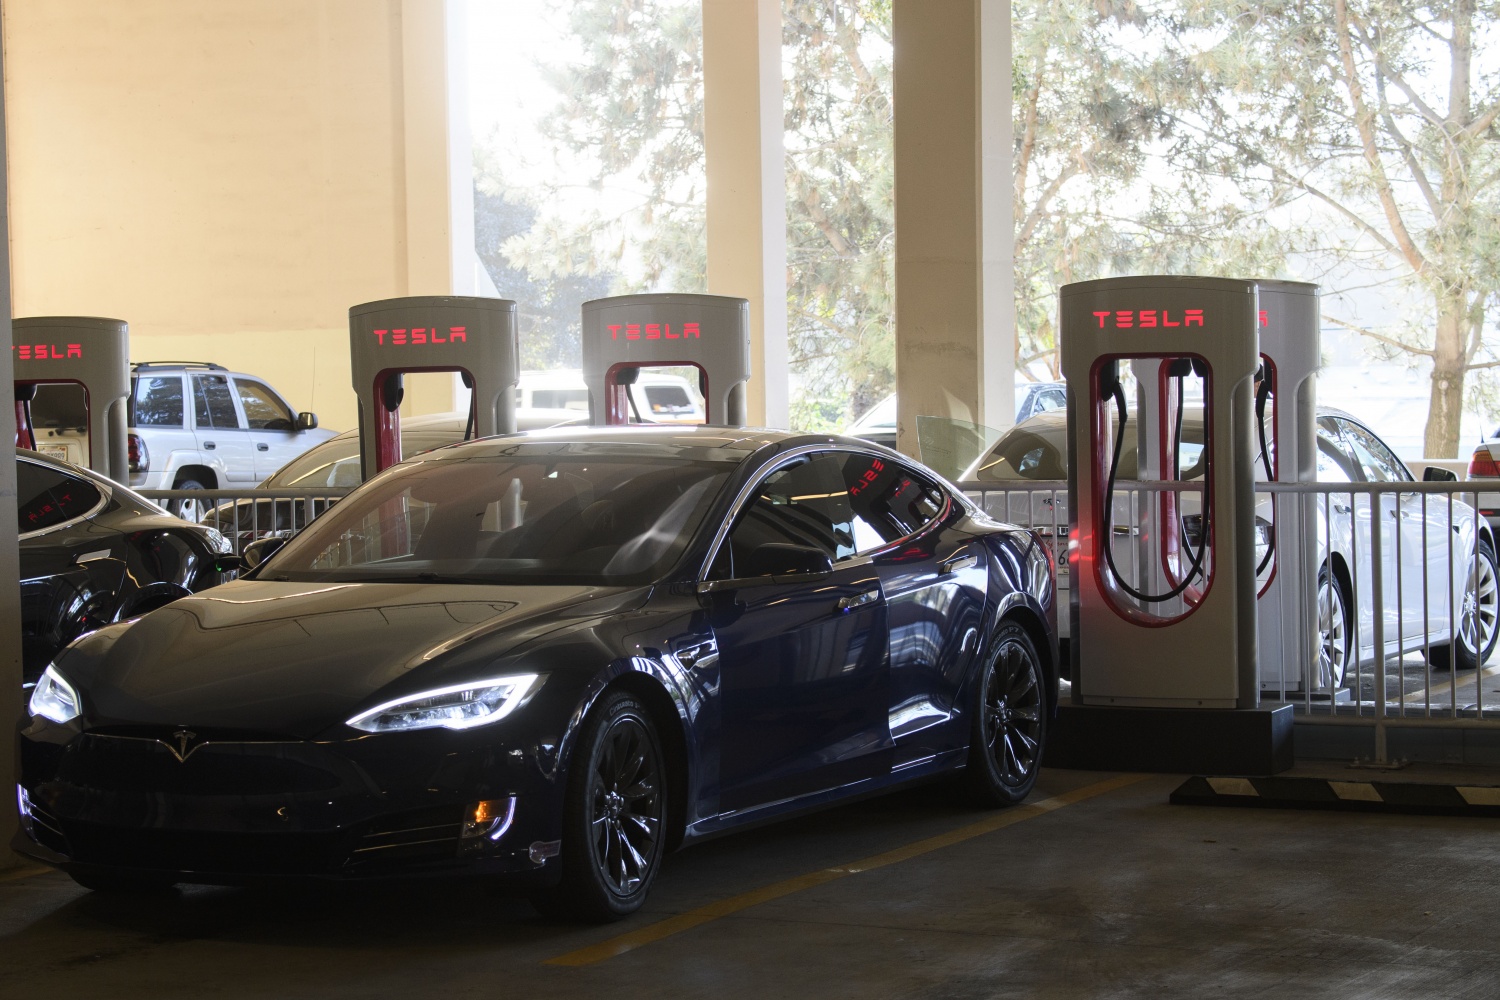 Tesla is assisting Texas in its power grid woes but aims to do more via its Powerwall system. 